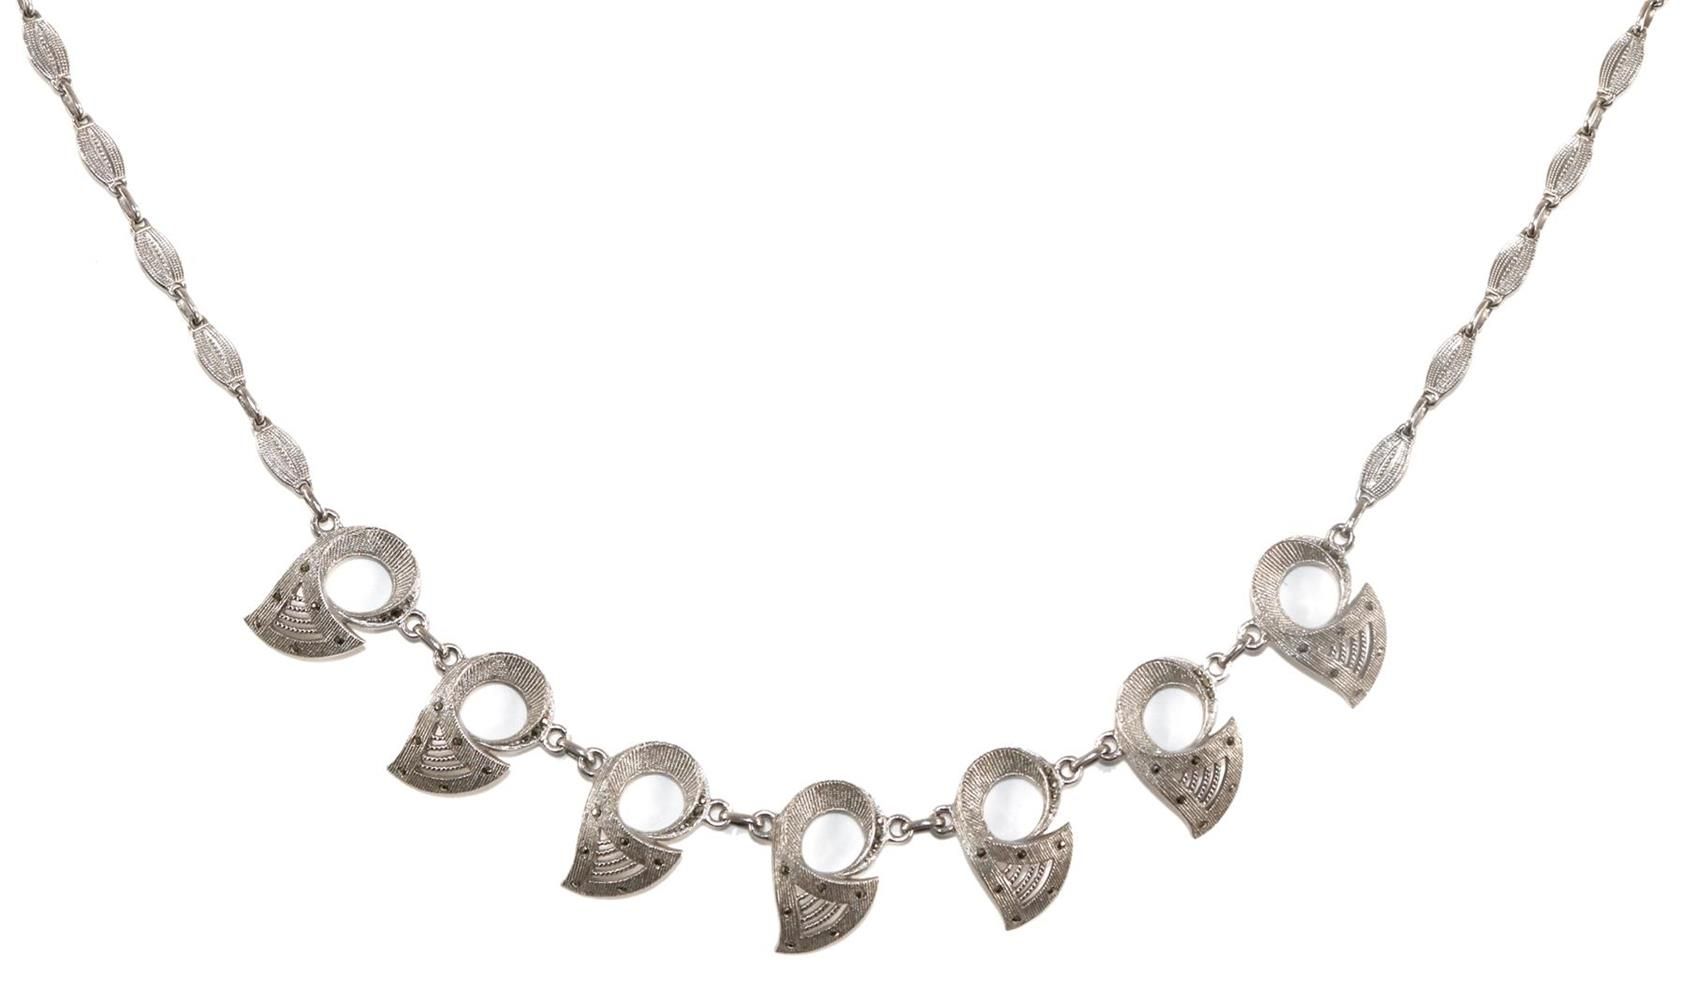 Collier um 1935/40 Theodor Fahrner silver necklace with snail-shaped elements u.&hellip;